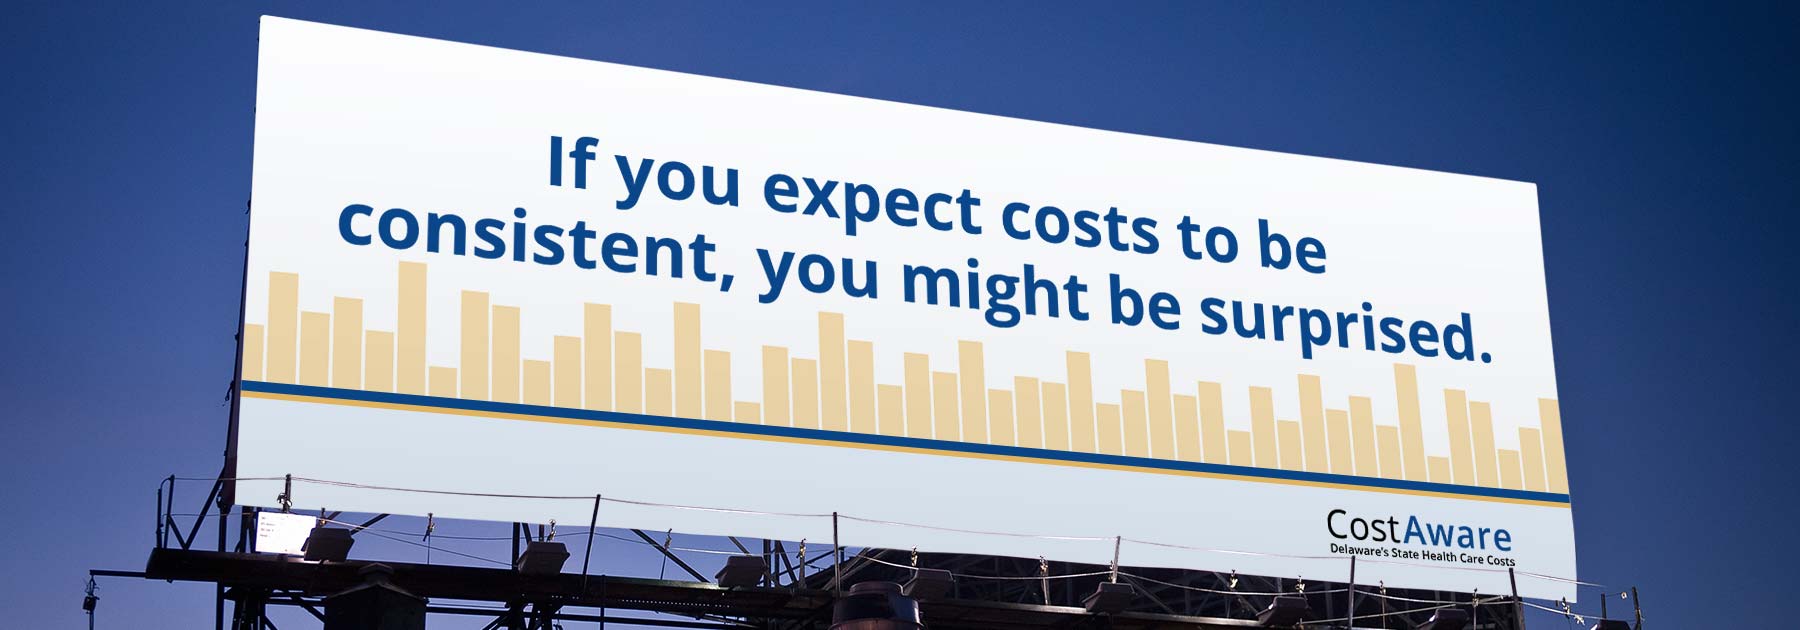 Billboard: If you expect costs to be consistent, you might be surprised.